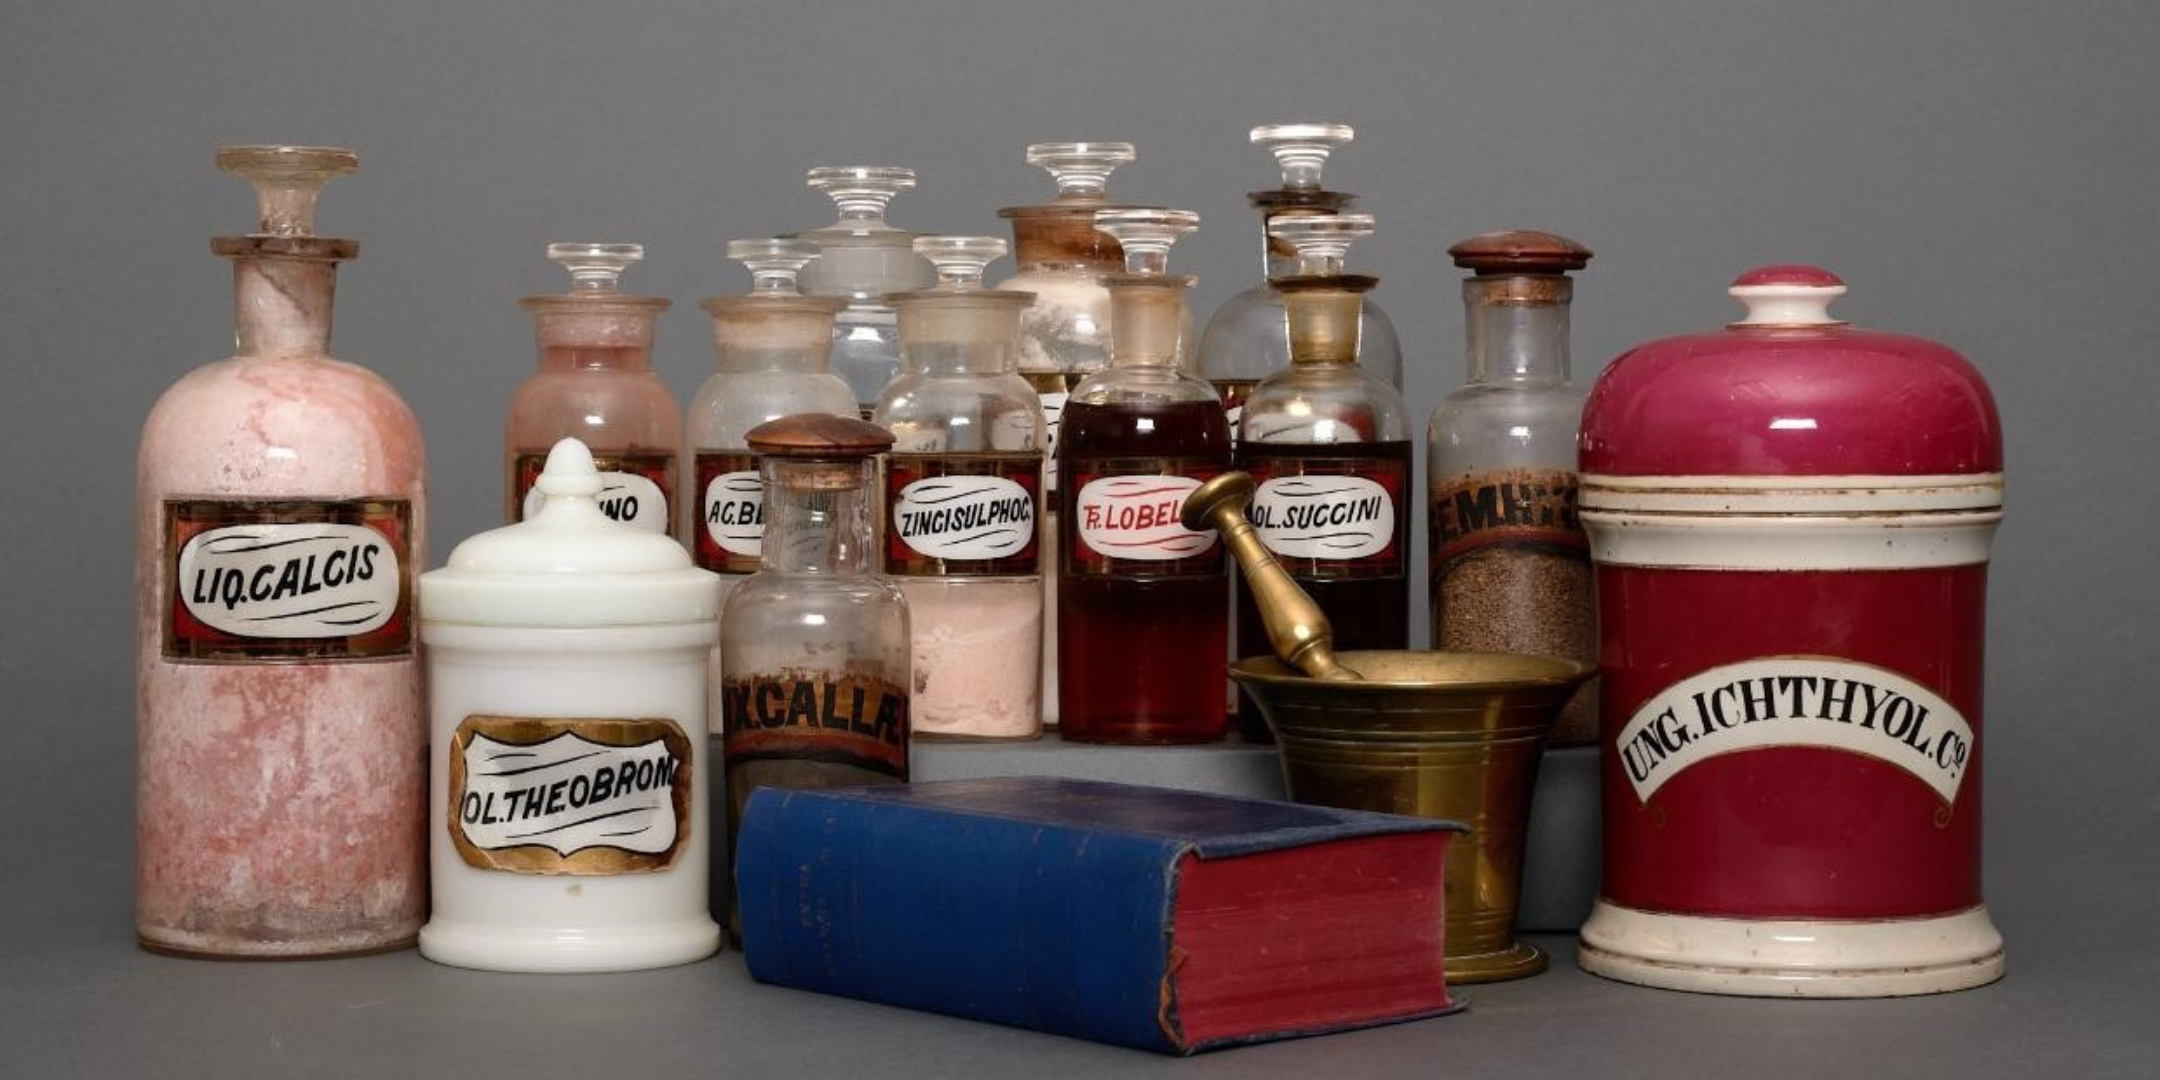 A group of vintage pharmaceutical bottles from the Castle Chemists collection on a grey background.